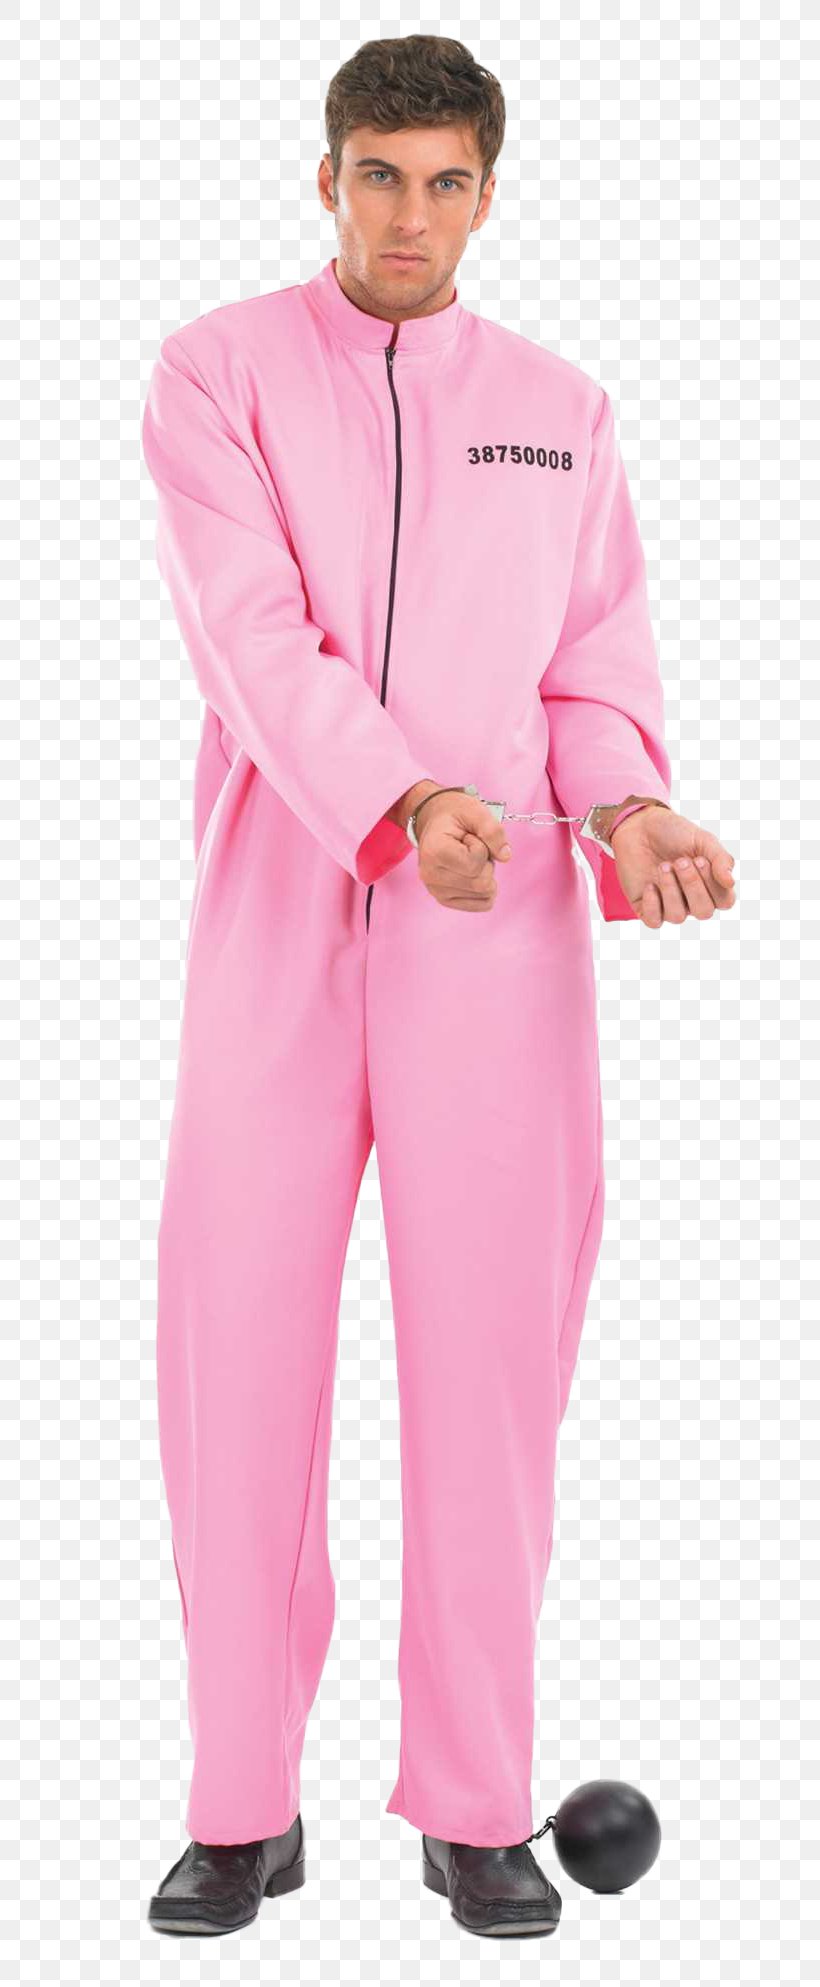 Costume Party Prison Uniform Suit Pink, PNG, 673x1987px, Costume, Clothing, Clothing Accessories, Convict, Costume Party Download Free